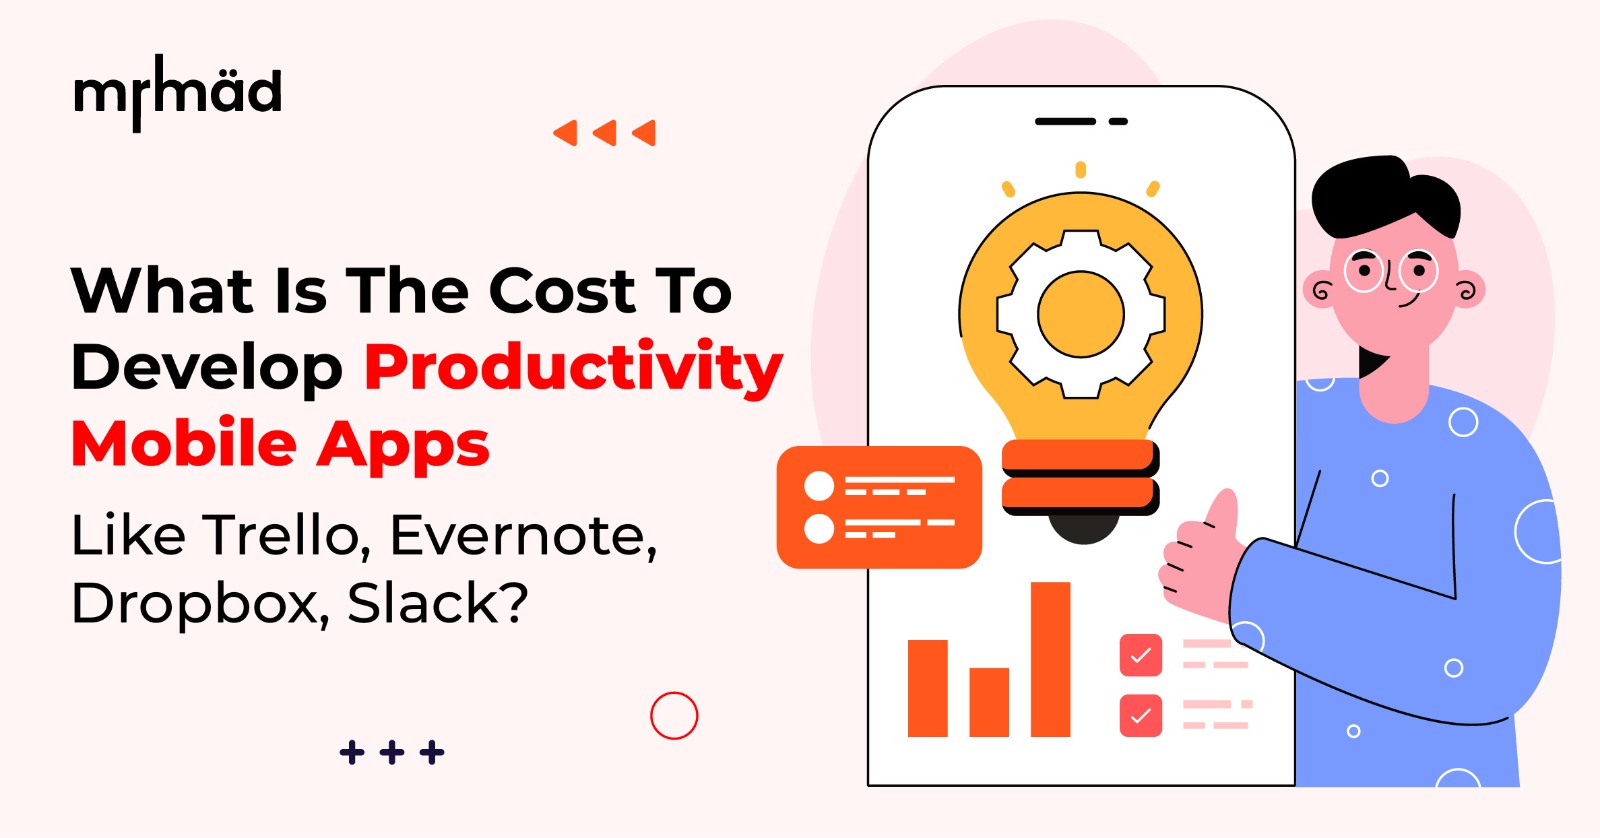 What Is The Cost To Develop Productivity Mobile Apps Like Trello, Evernote, Dropbox, Slack?